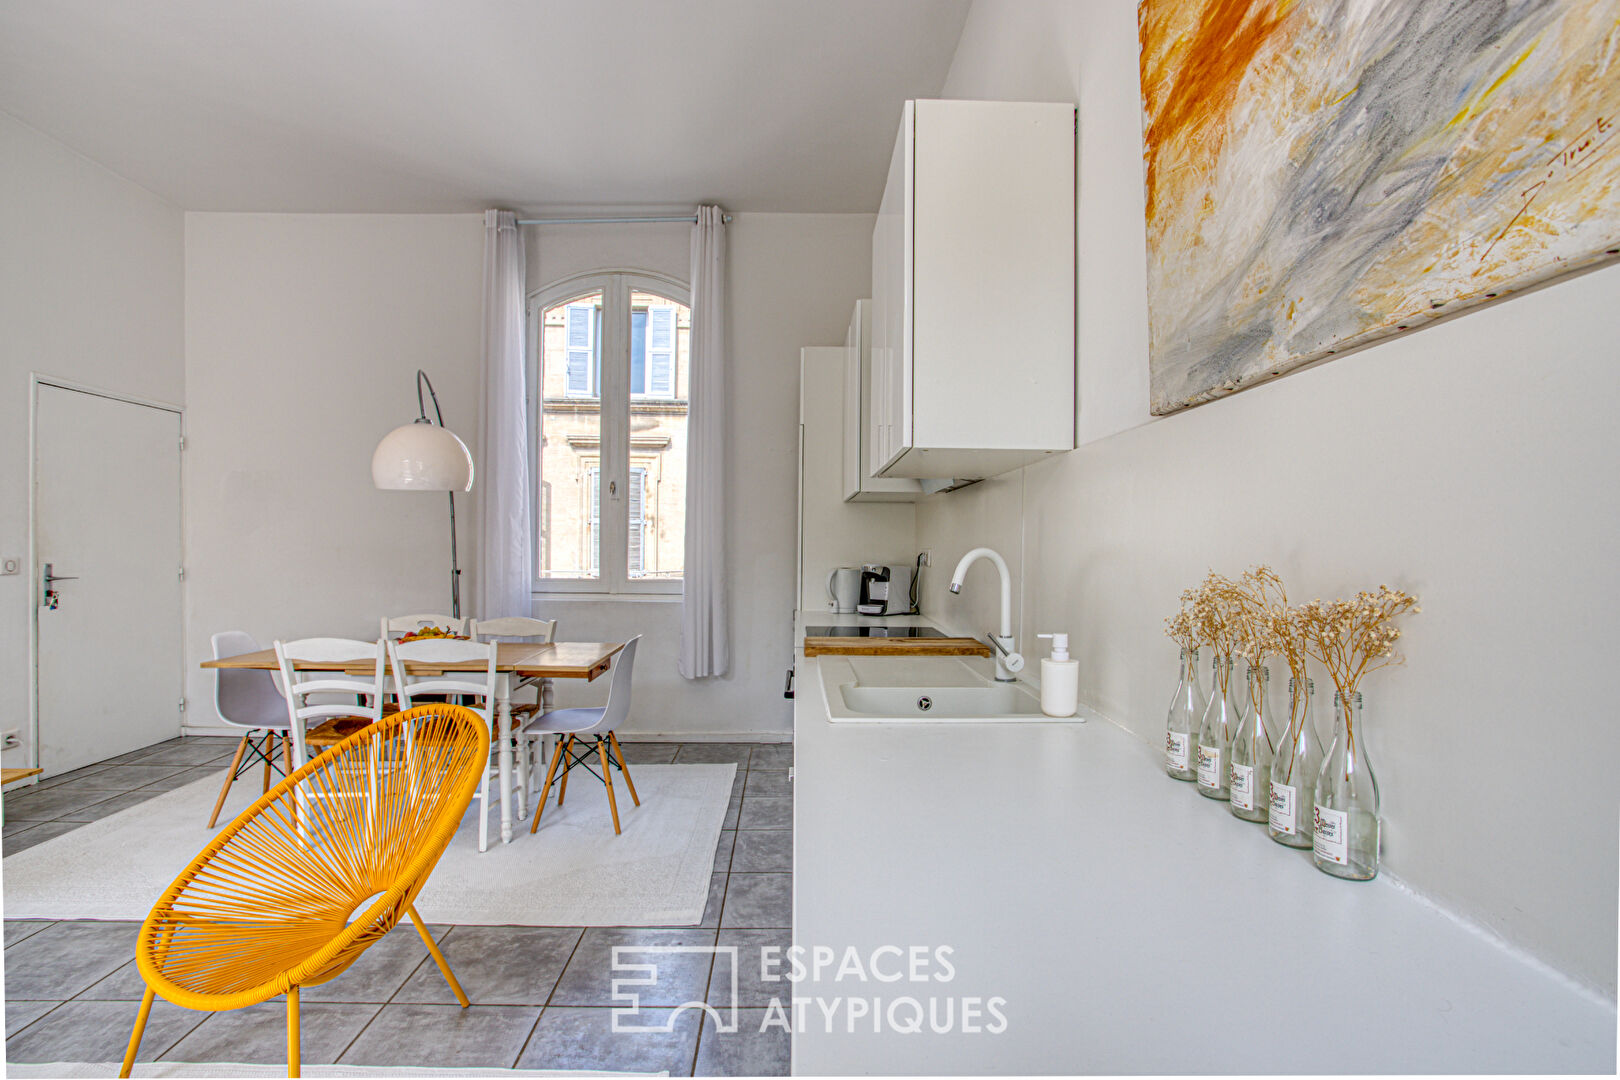 Refined renovation for this beautiful duplex on the top floor